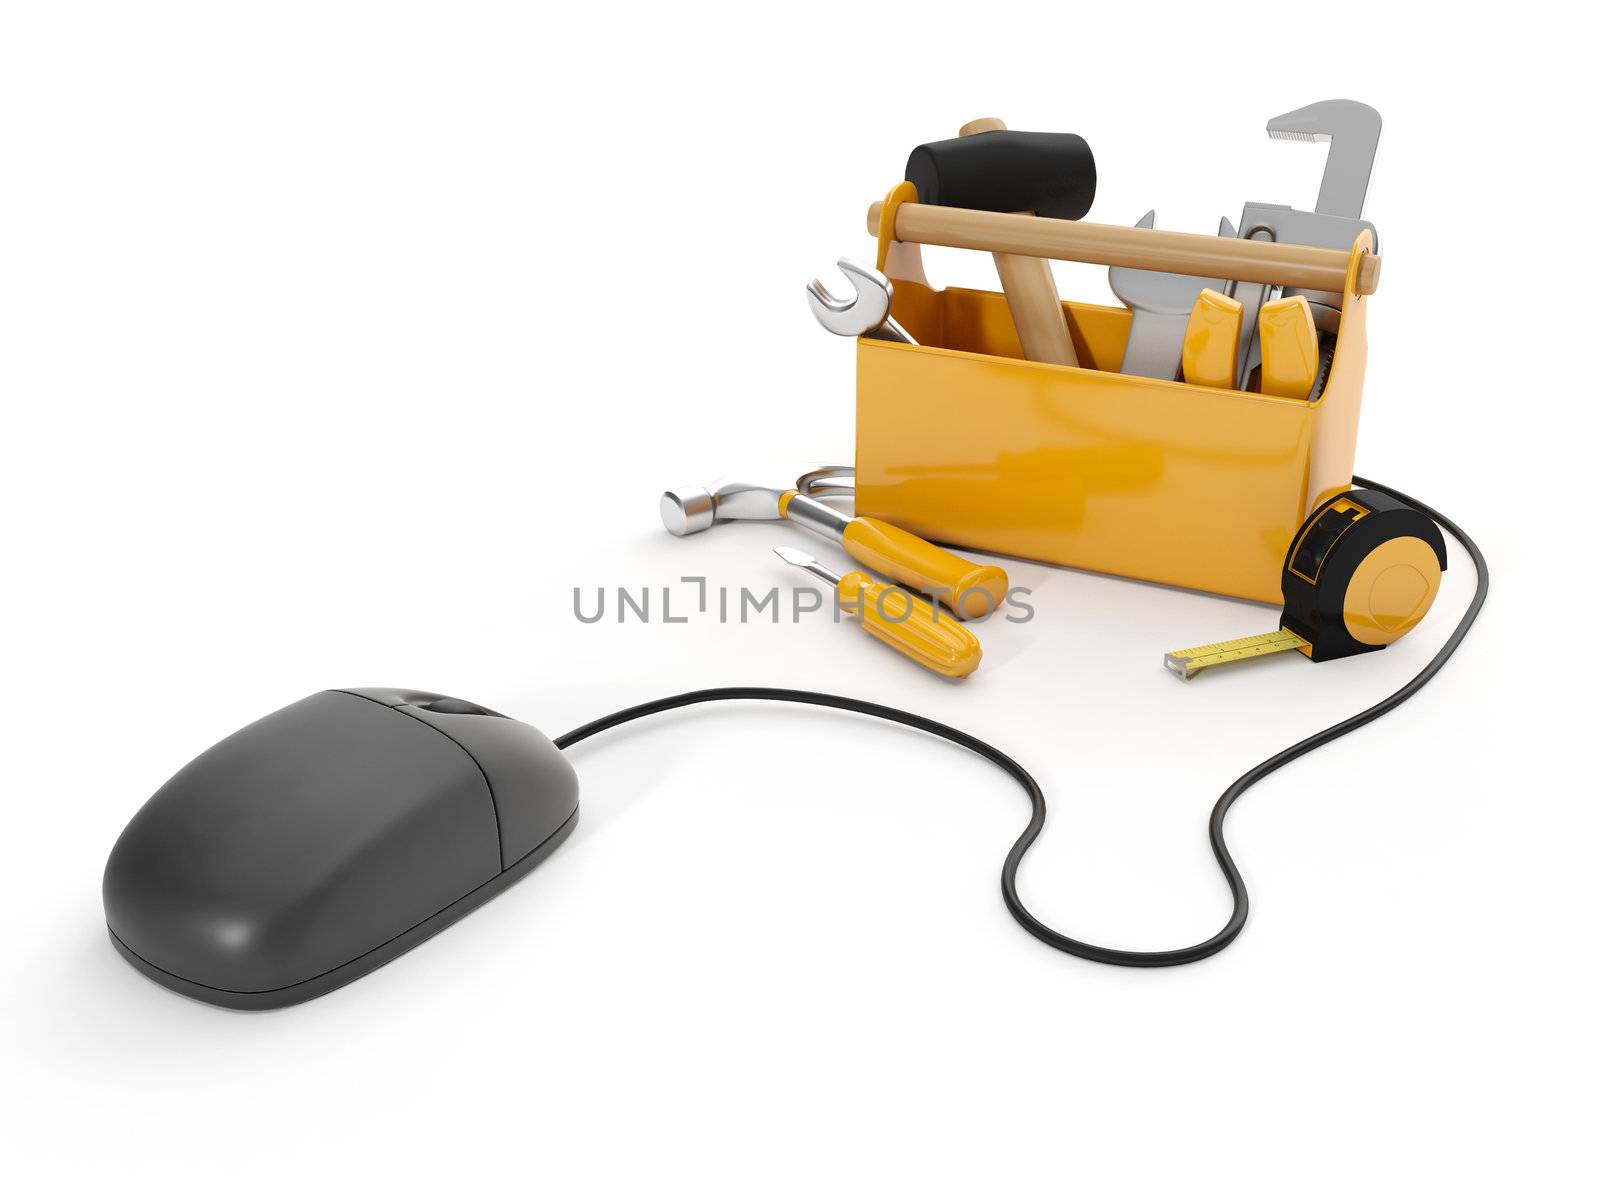 3d illustration: Online tools, technical support. Mouse and a group of tools on white background, isolated